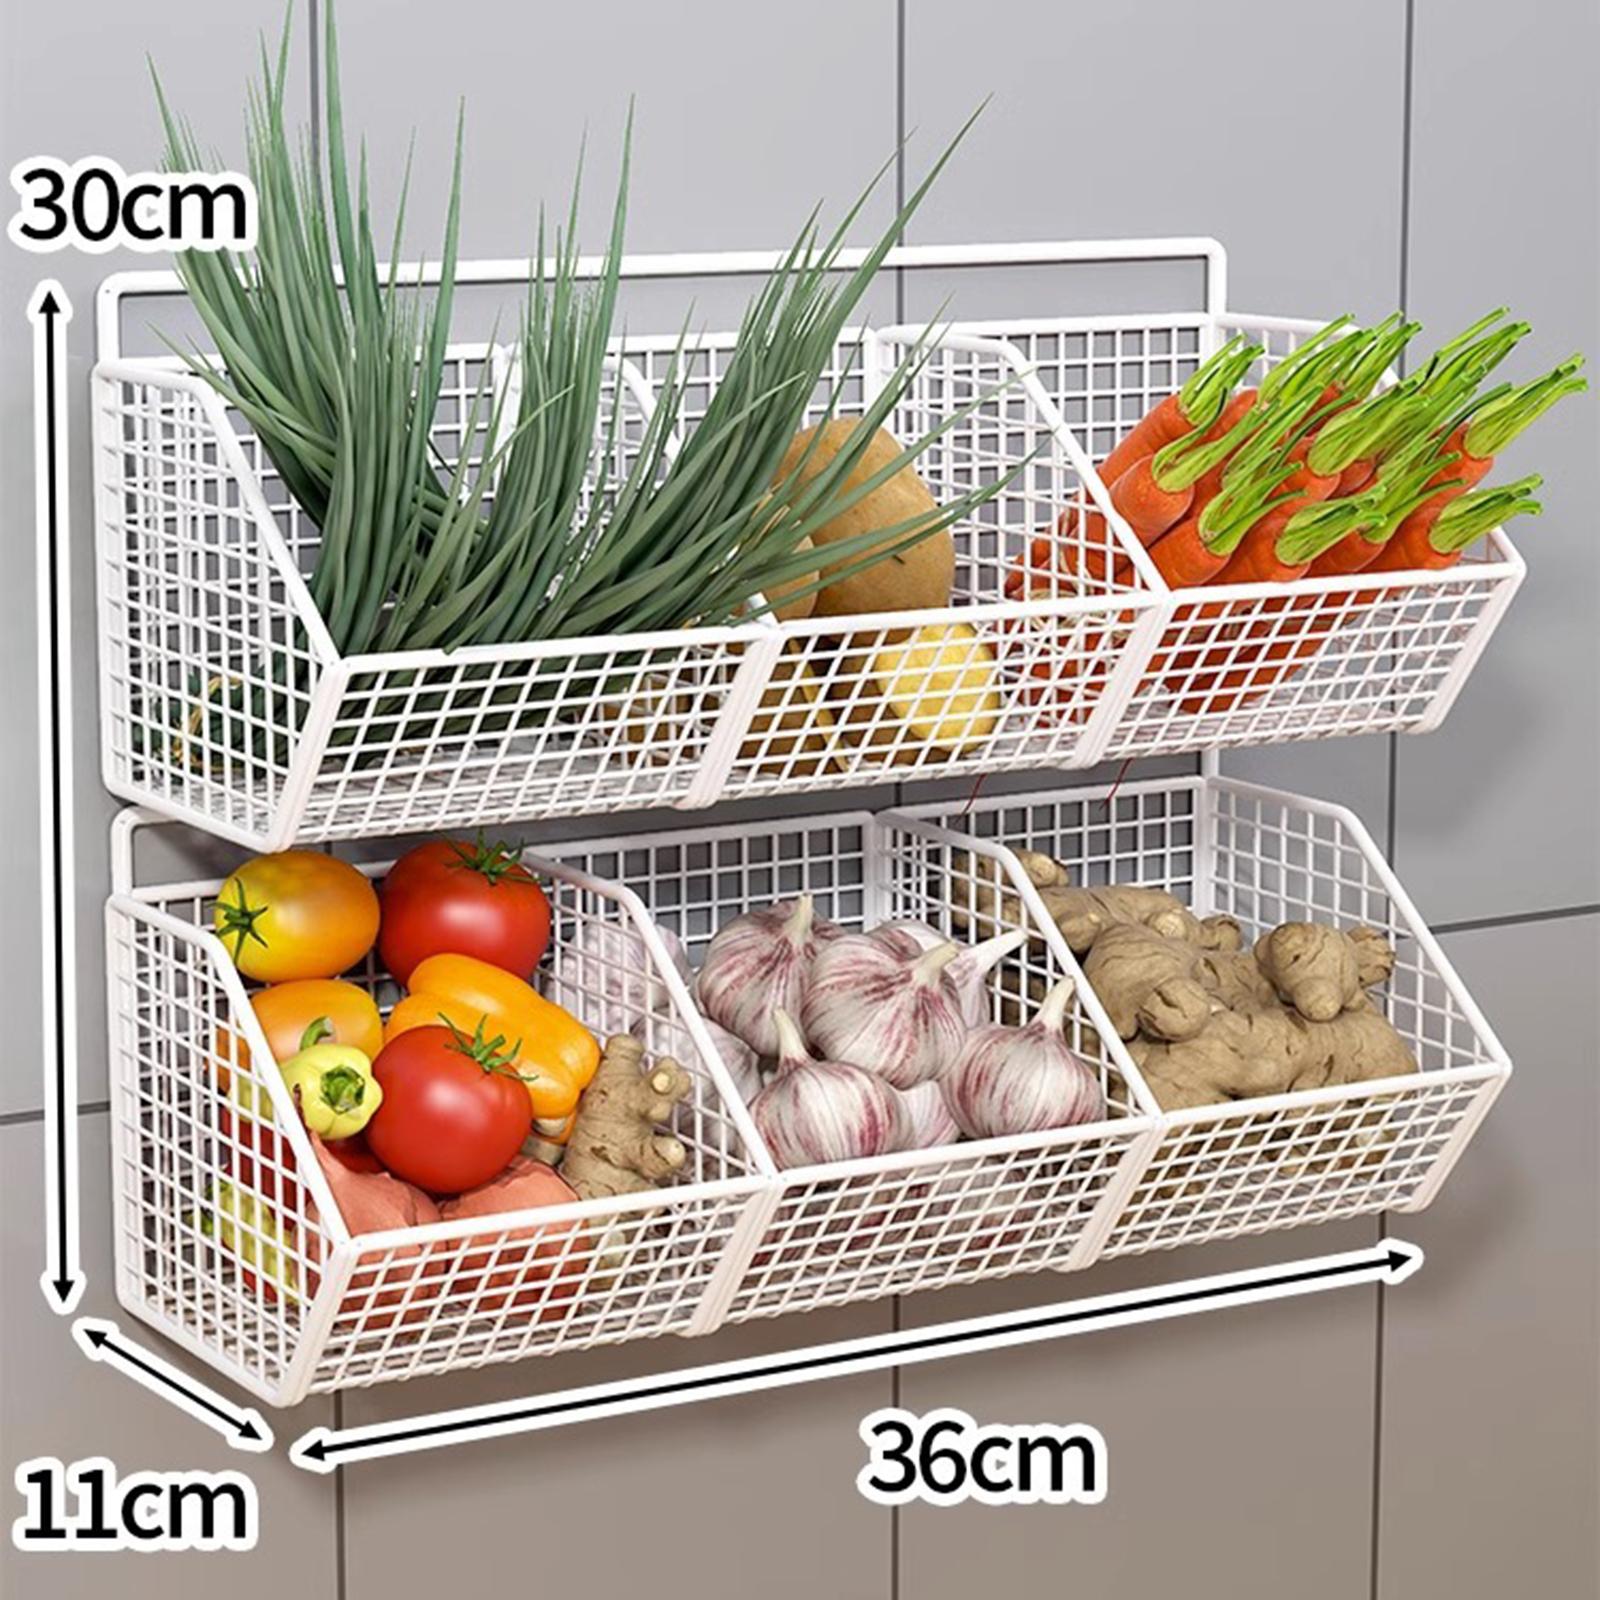 Fityle 2x Hanging Wall Basket Wire Hanging Basket 3 Grids Farmhouse Decor Wall Mounted Shelves Minimalist Hanging Fruit Basket for Bathroom Kitchen